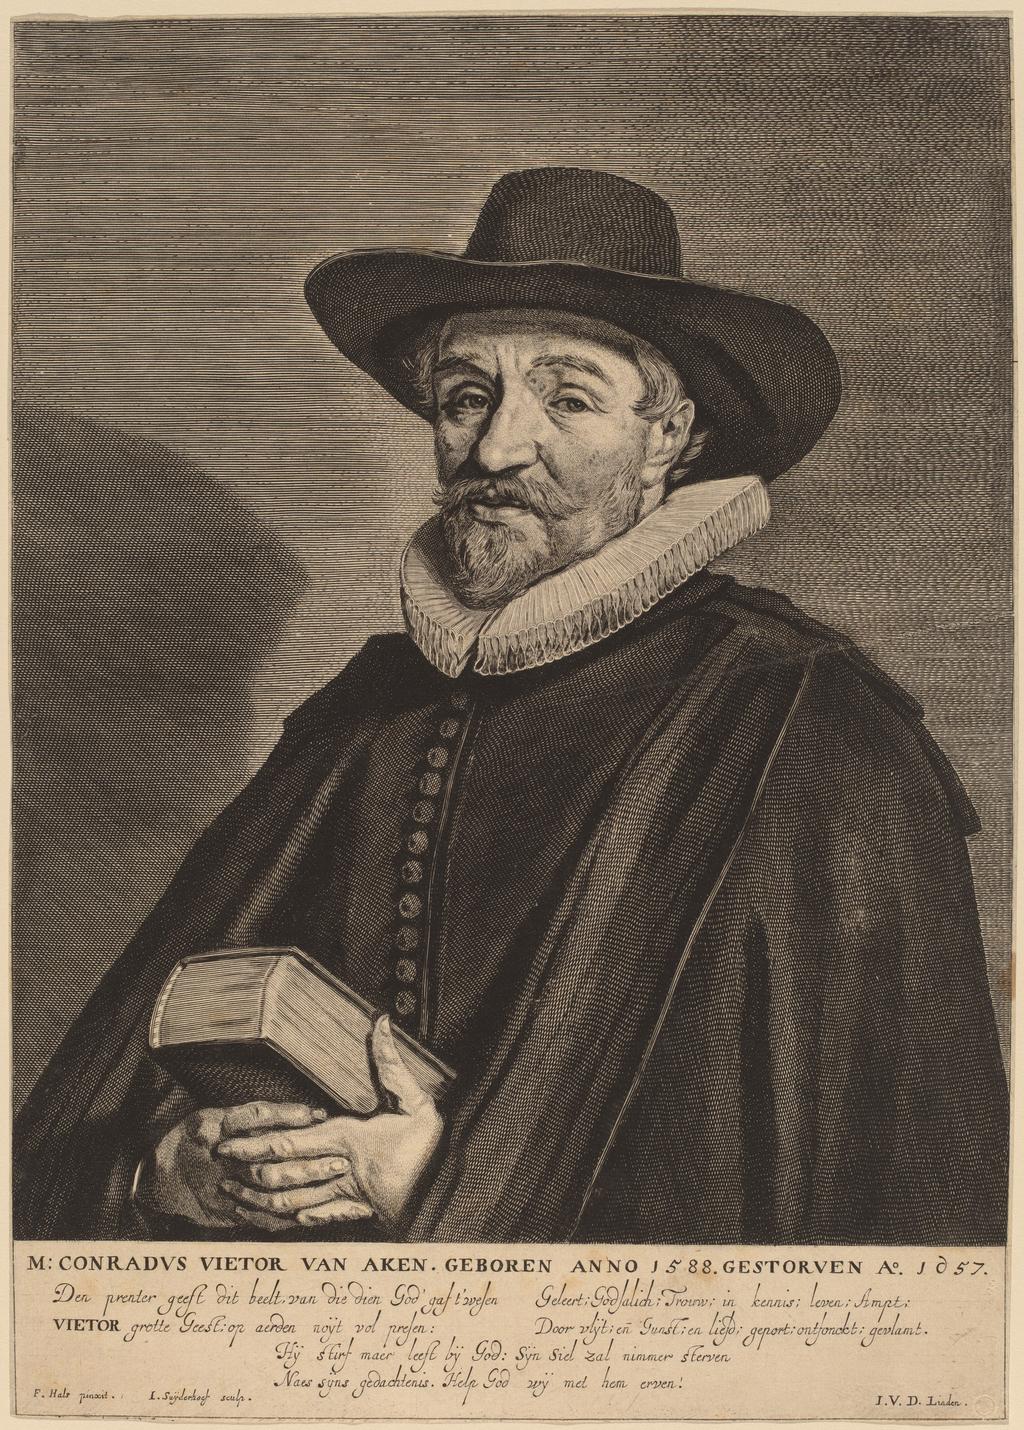 Page 3 of 9 Conradus Vietor, a Lutheran preacher from Aachen, was born there in Comparative Figures 1588 and died in Haarlem in 1657.